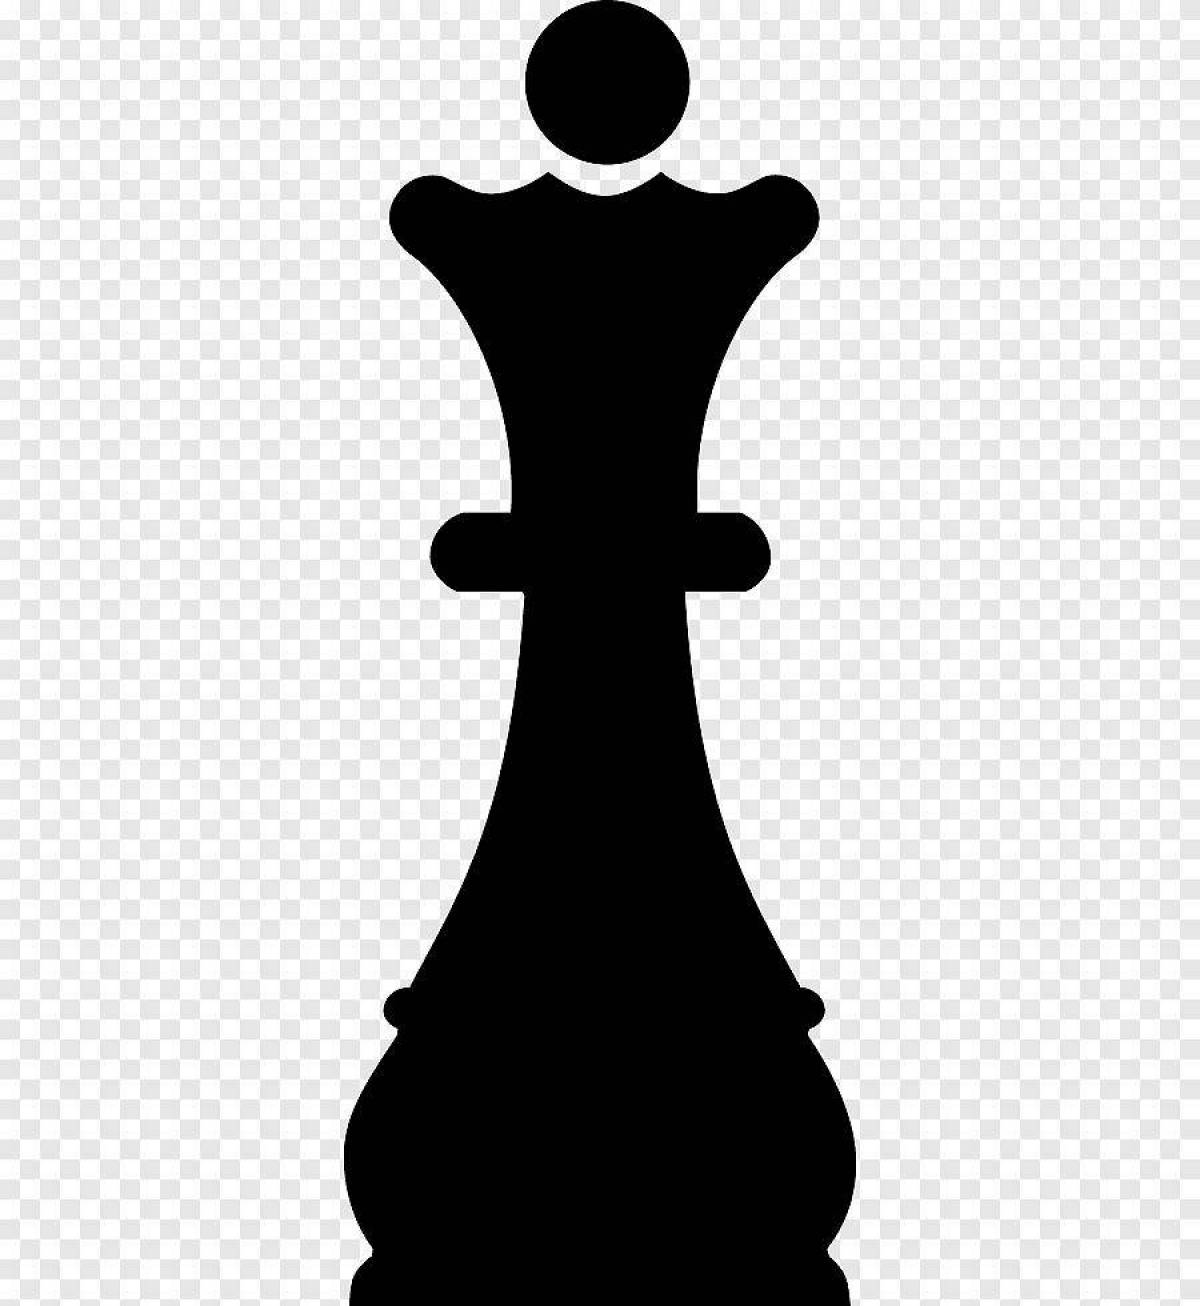 Coloring page elegant chess queen